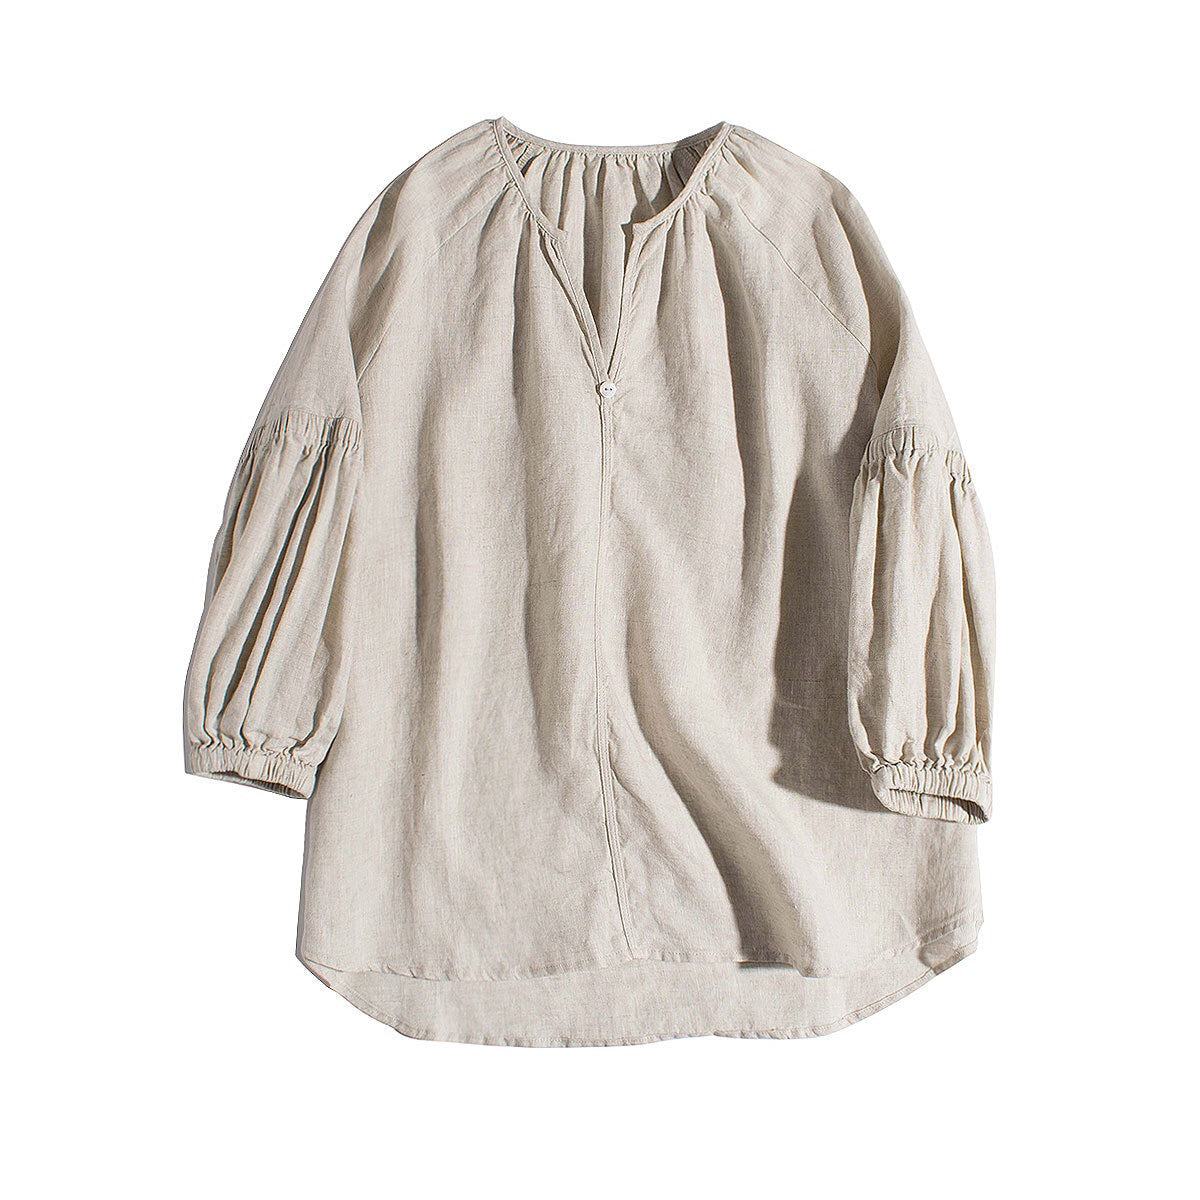 Orchid Blossoms V-Neck 100% Linen Blouse | Hypoallergenic - Allergy Friendly - Naturally Free